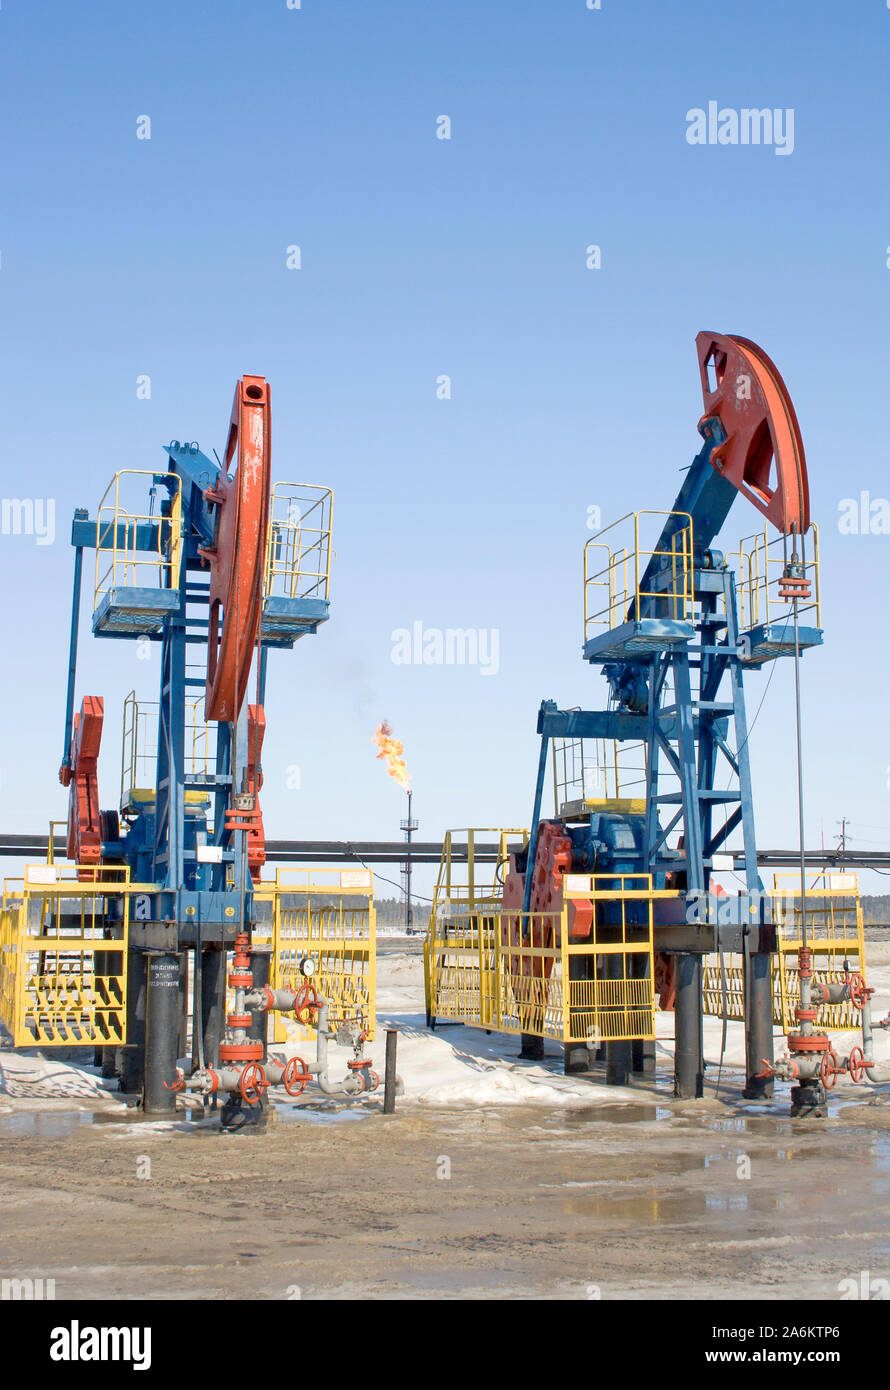 Oil pumps and gasl torch. Oil industry. Gas industry. Blue sky Stock Photo